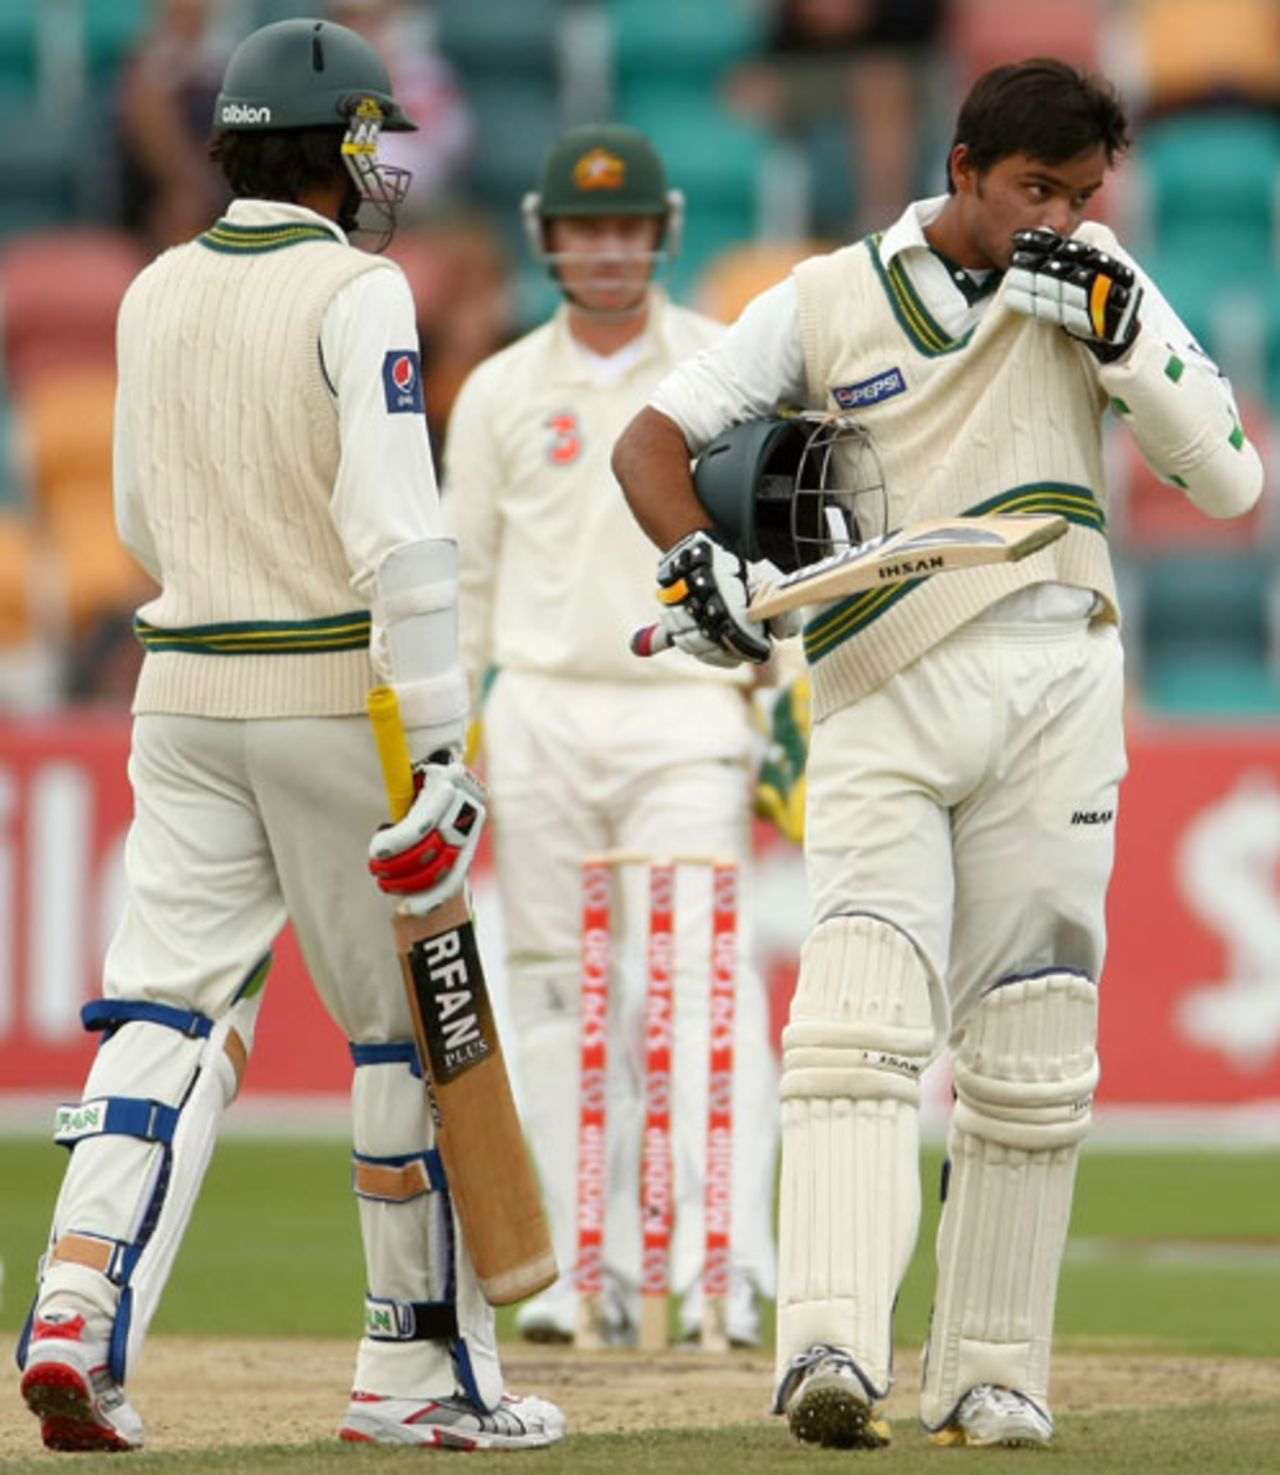 Khurram Manzoor kisses his badge after reaching his half-century, 3rd Test, Australia v Pakistan, 5th day, Hobart, January 18, 2010